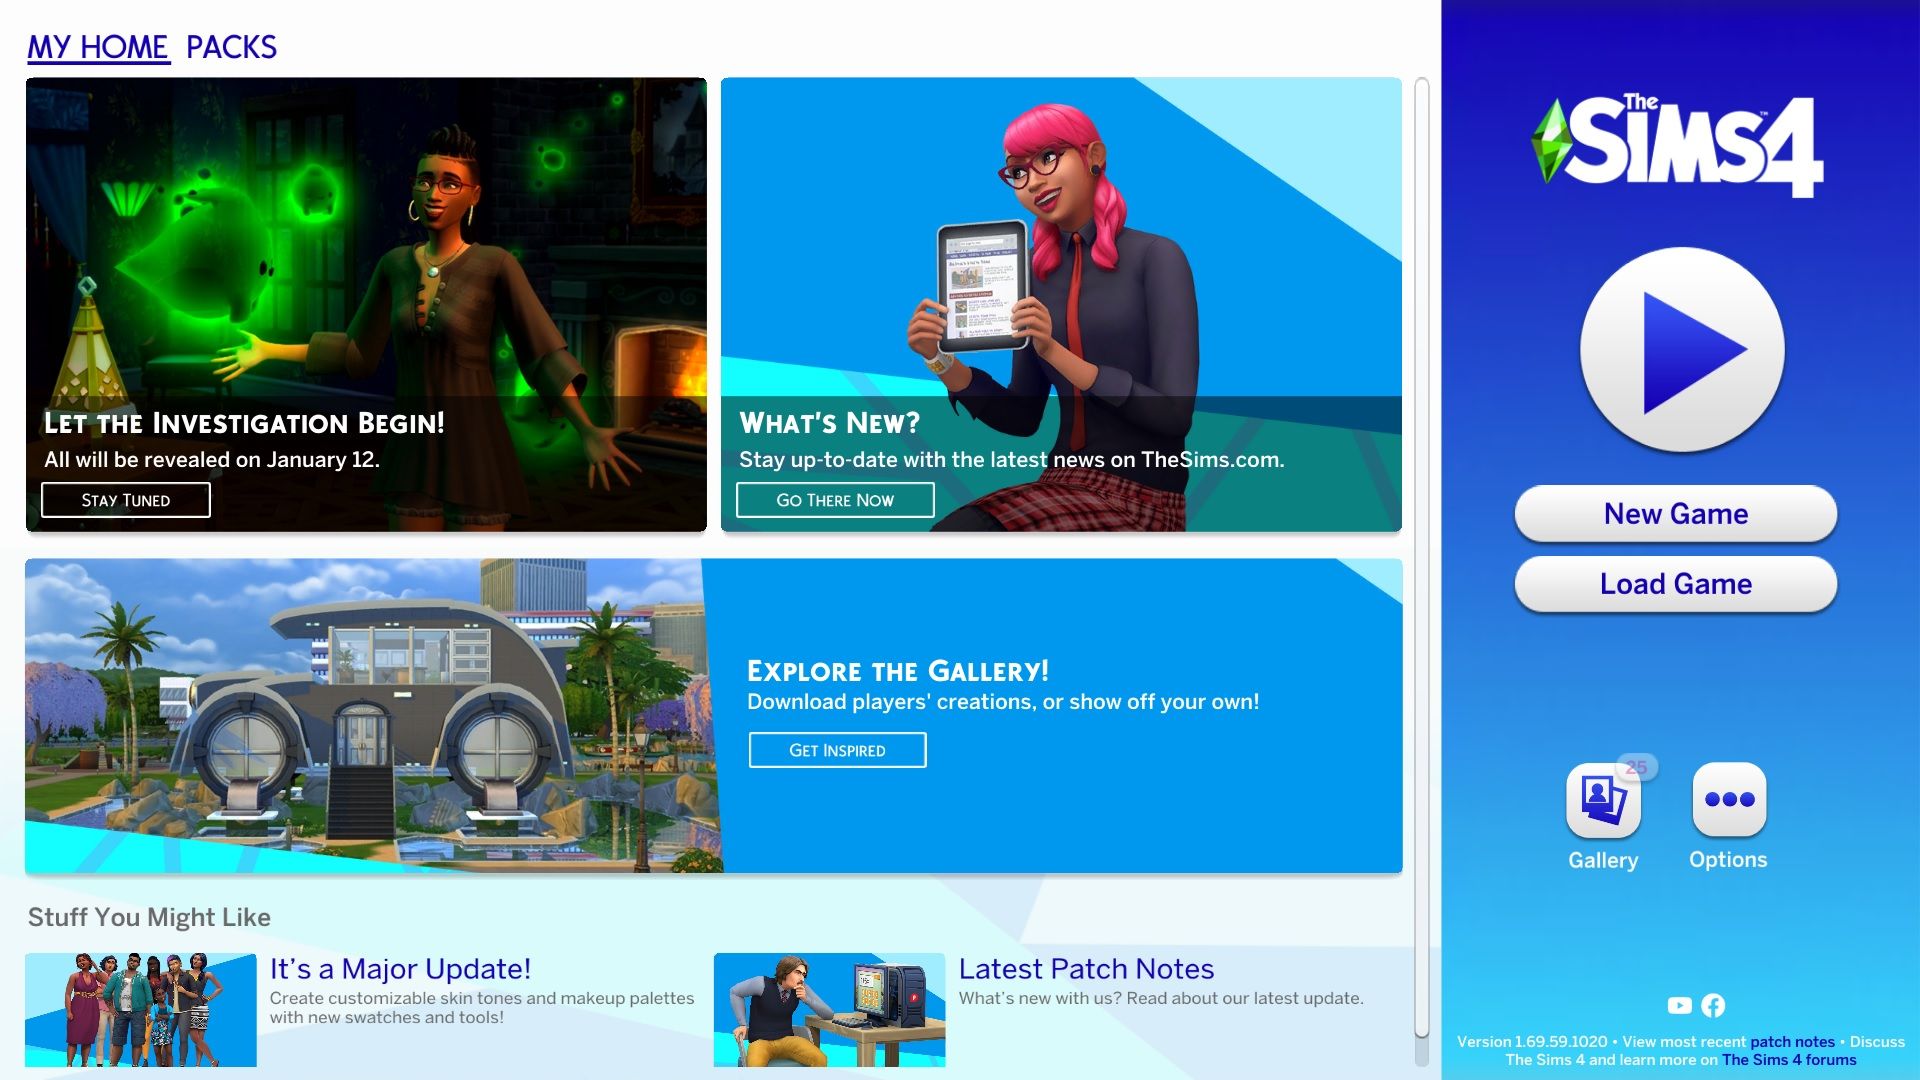 the sims 4 gallery offline?